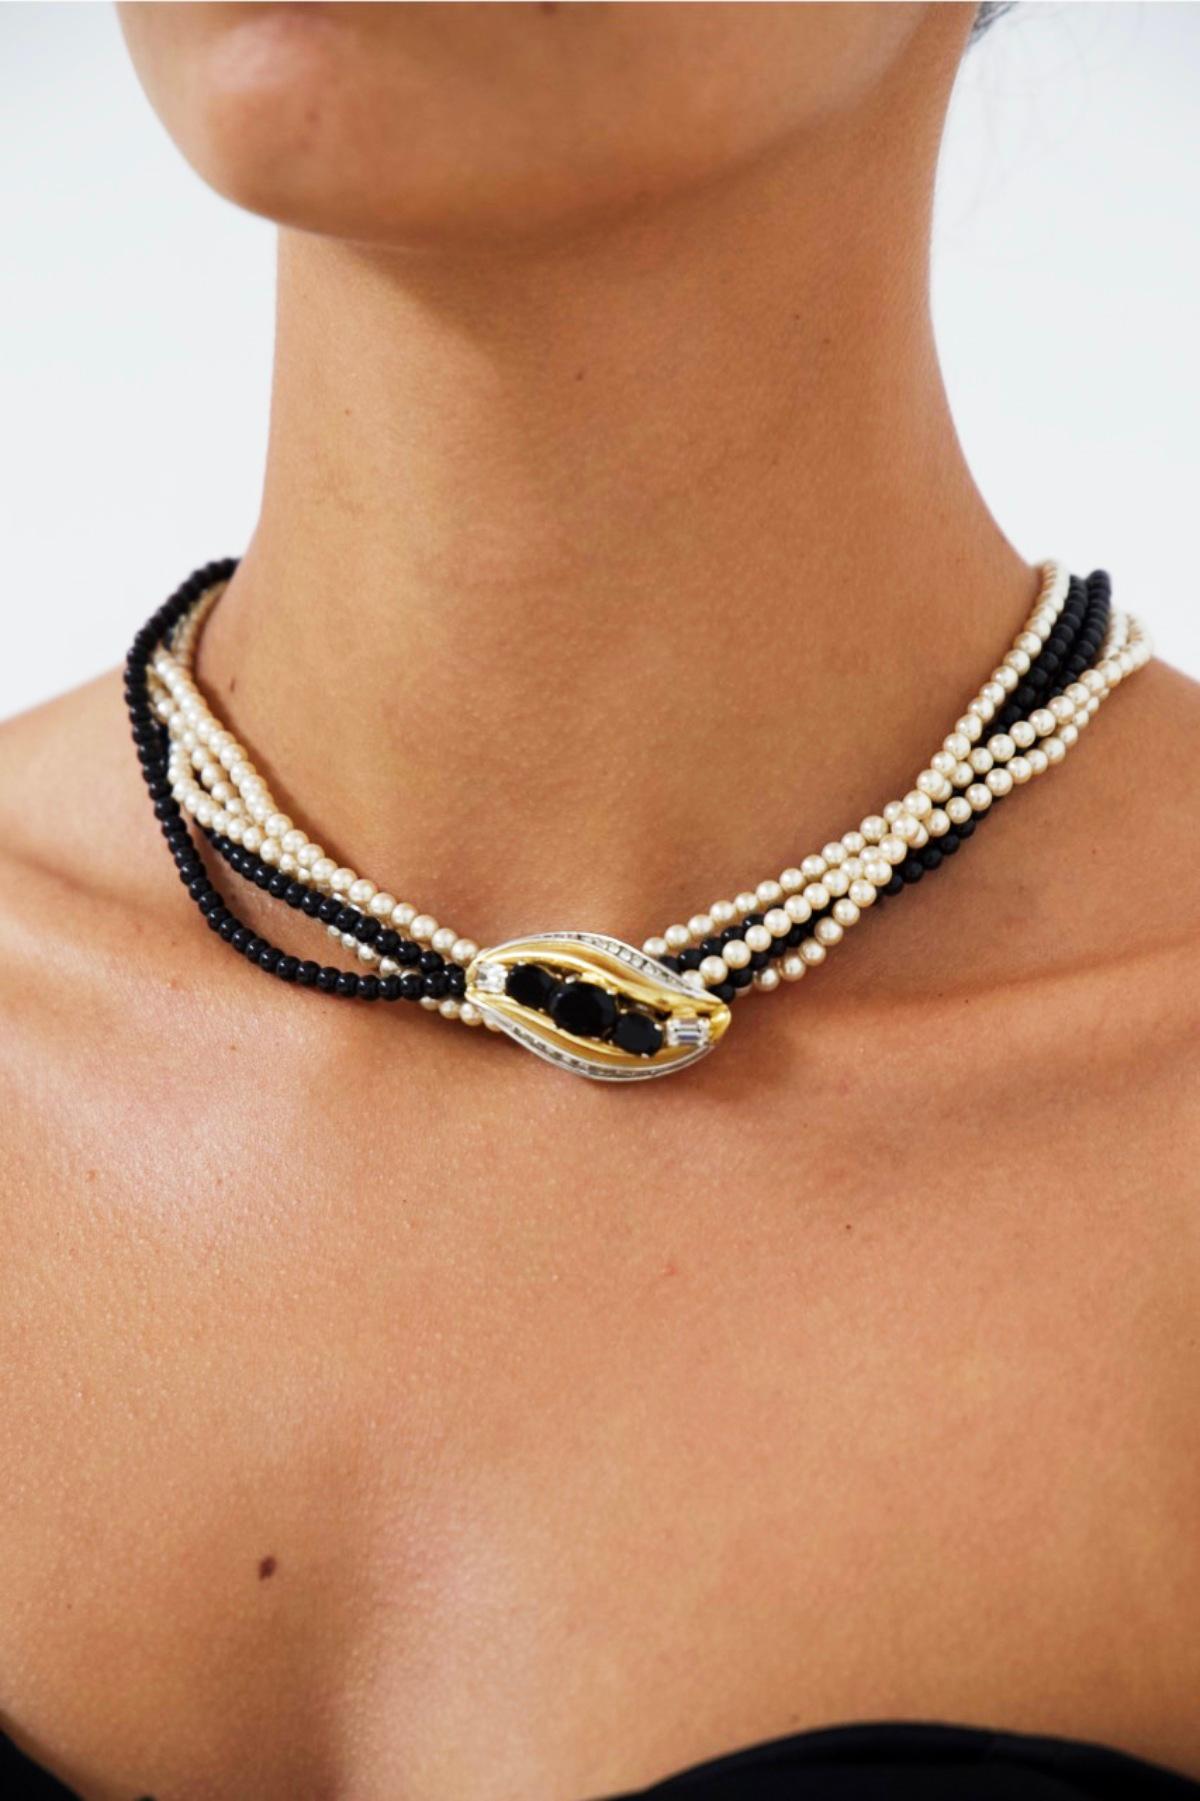 Superb double pearl choker made in the 1980s, fine French craftsmanship.
The necklace is wonderful and elegant.
It is made with 2 strands of black pearls and three white ones, very elegant. Centrally it shows a jewel, the highlight of the necklace: